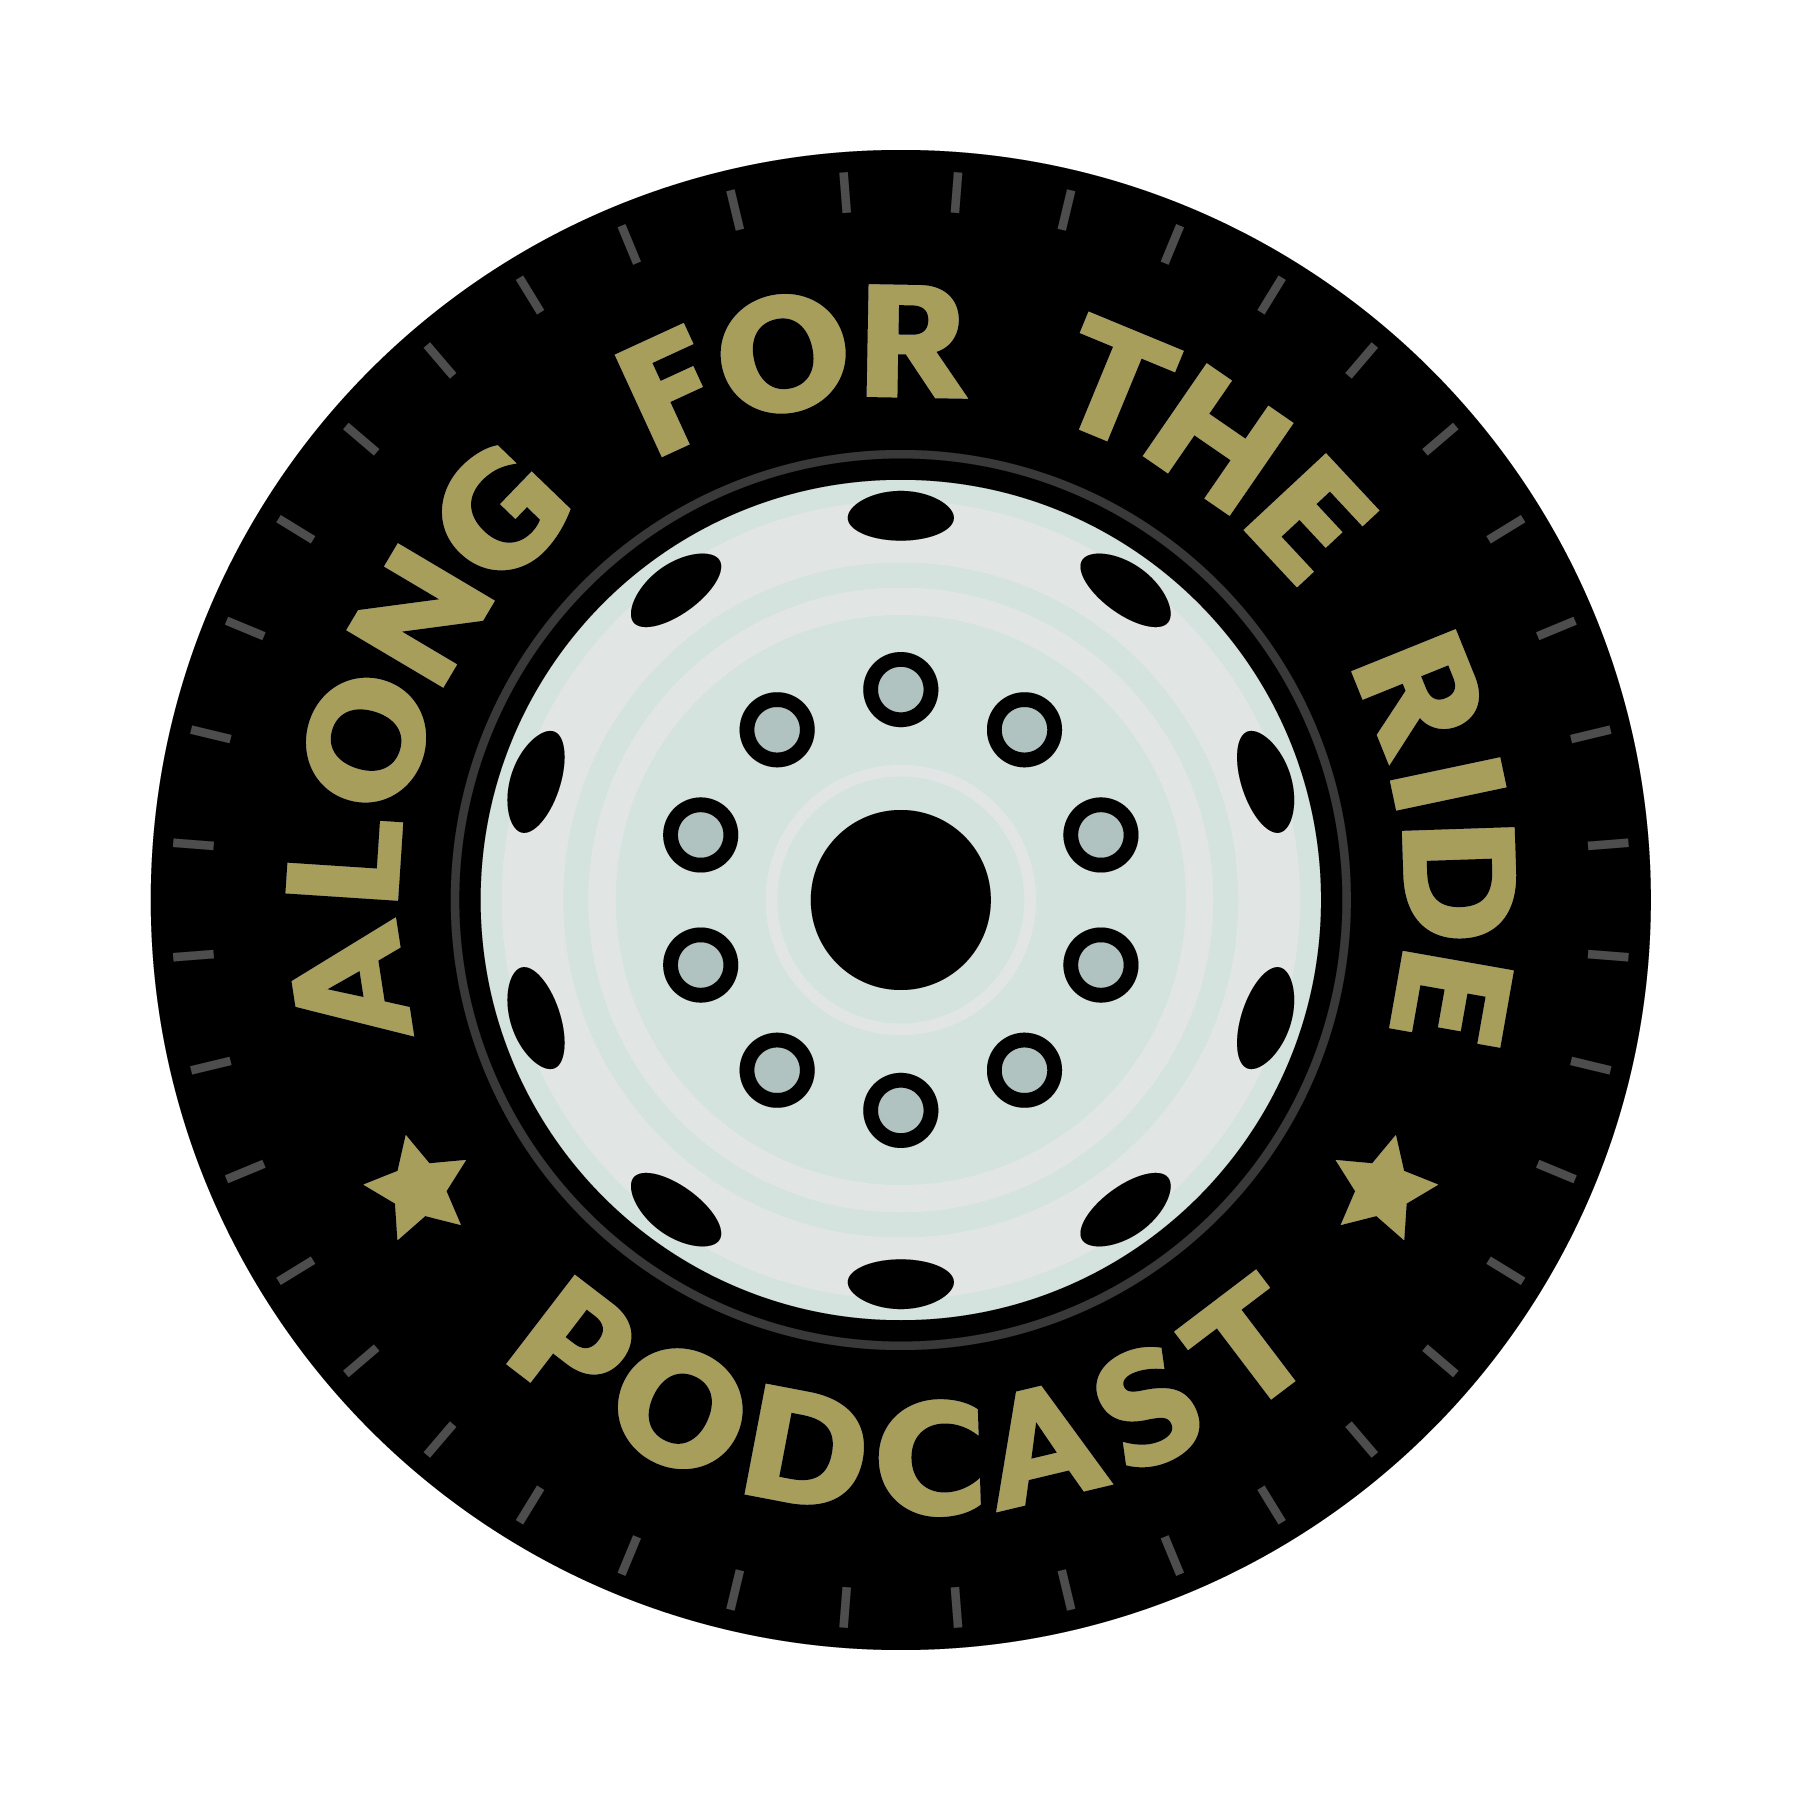 Along for the Ride podcast logo